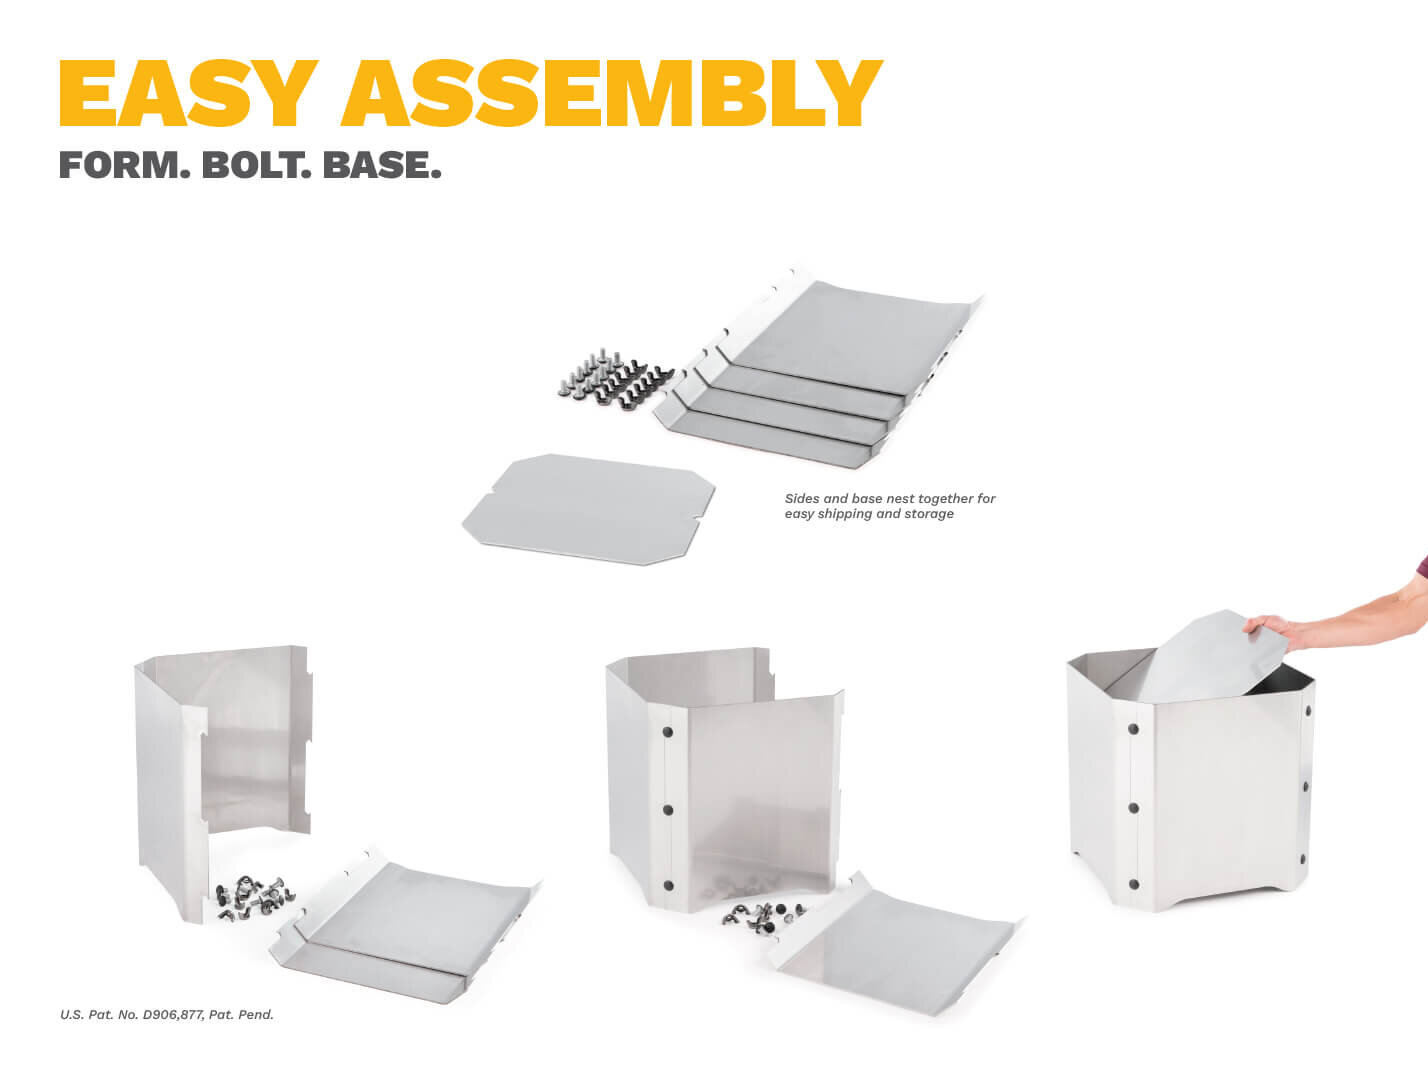 FloraForm Steel Planters assembly guide.